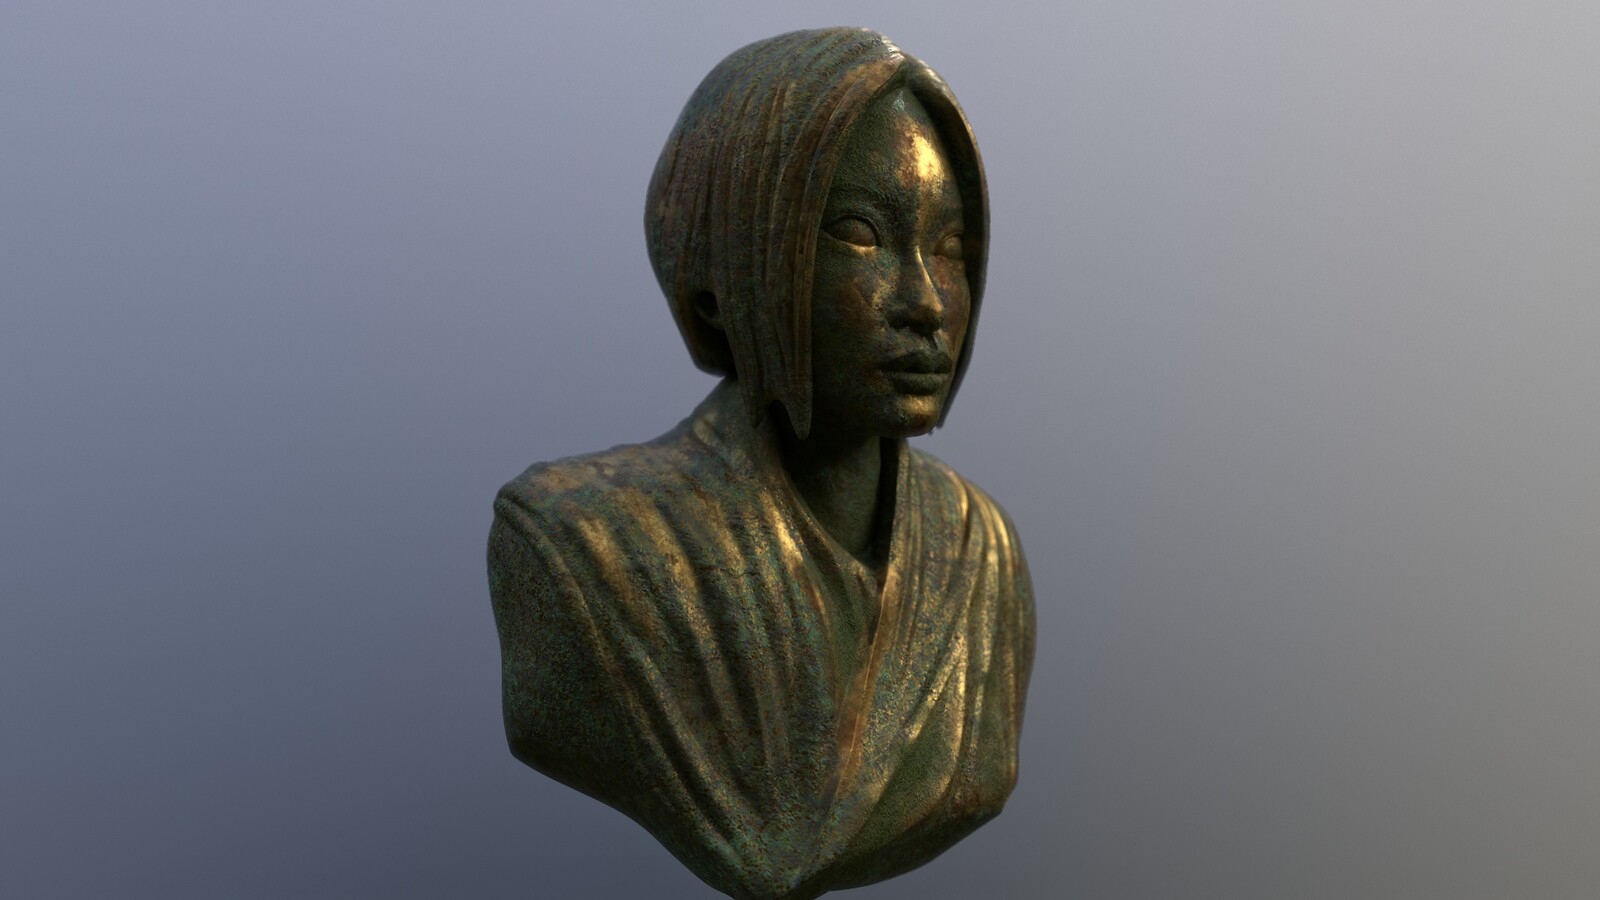 Aya Ueto bust. First experiment with texturing in Marmoset.